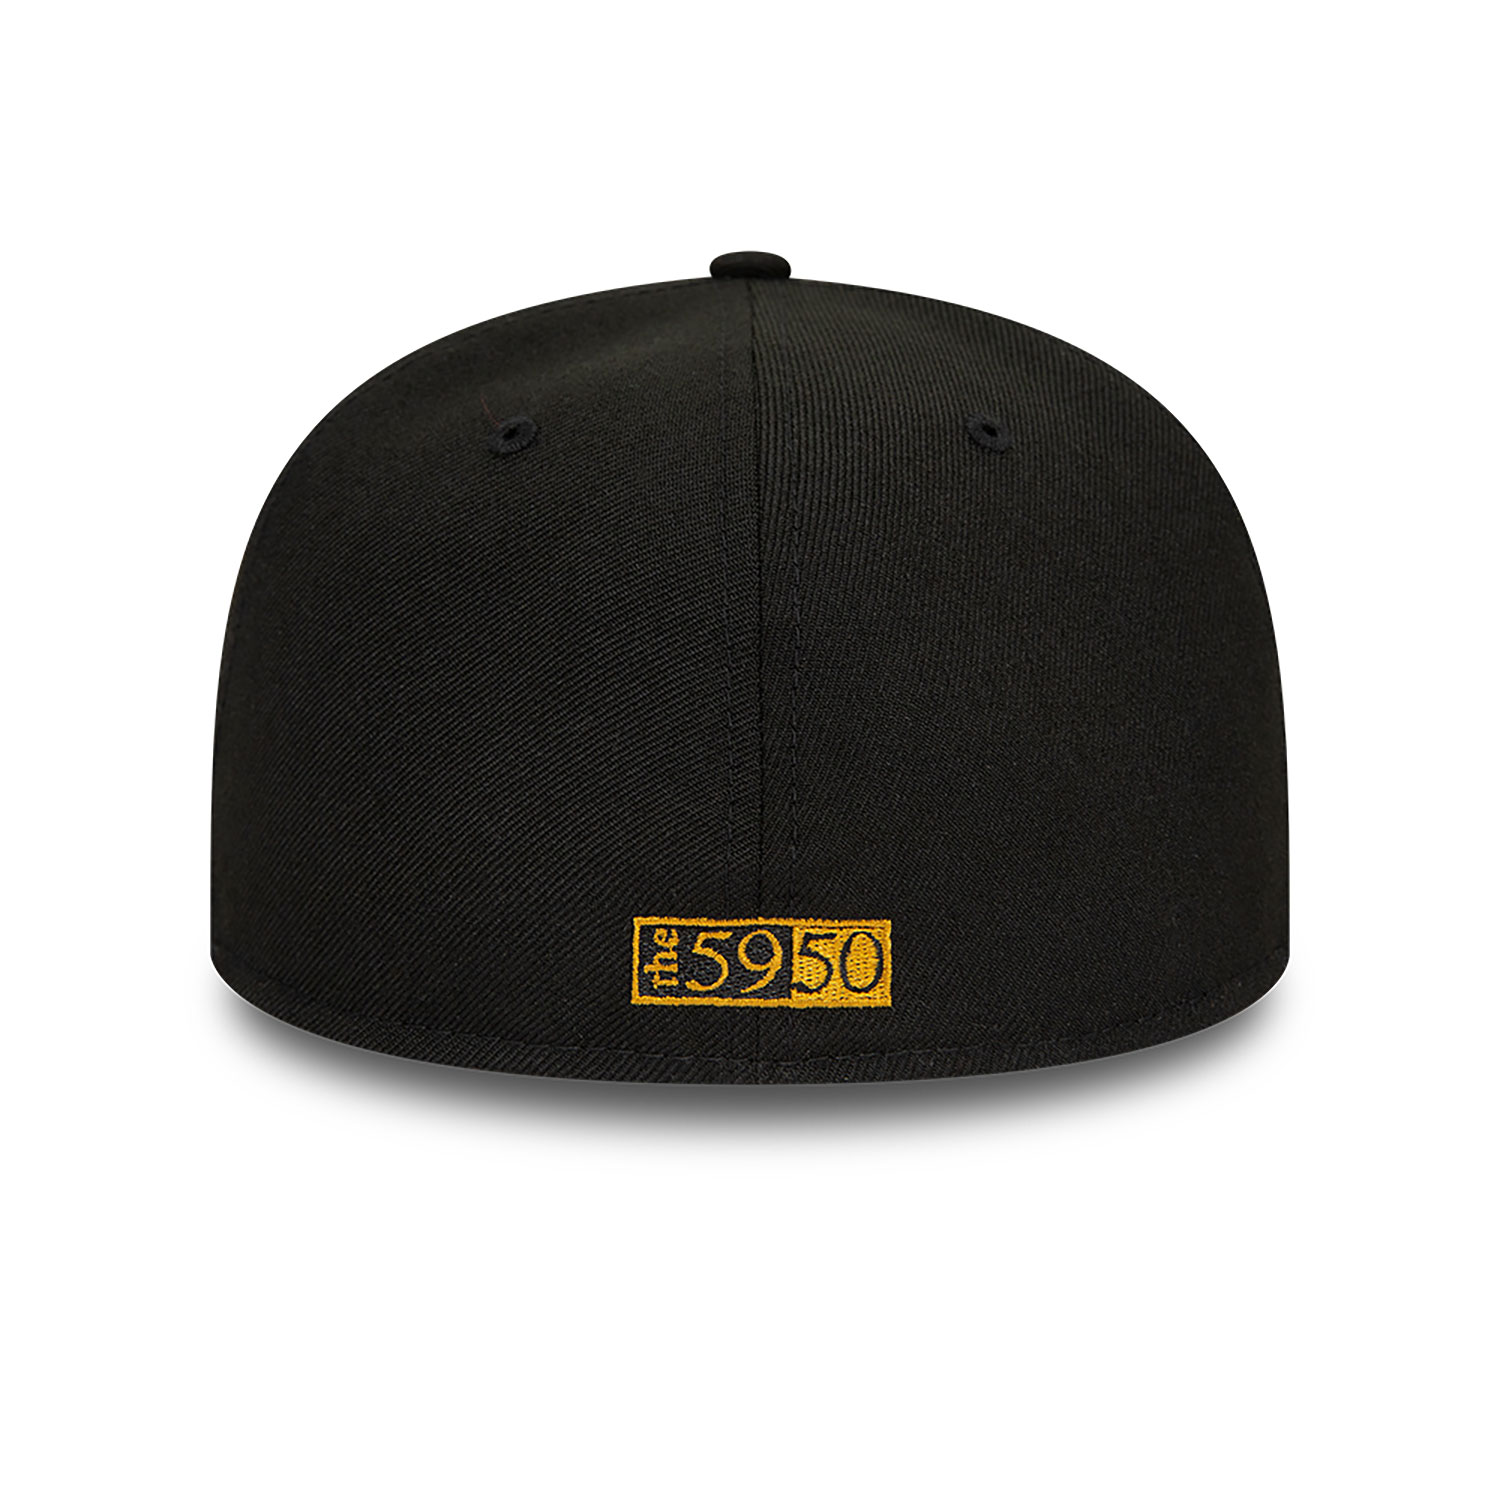 New Era 8 1/4 59FIFTY Black 59FIFTY Fitted Cap